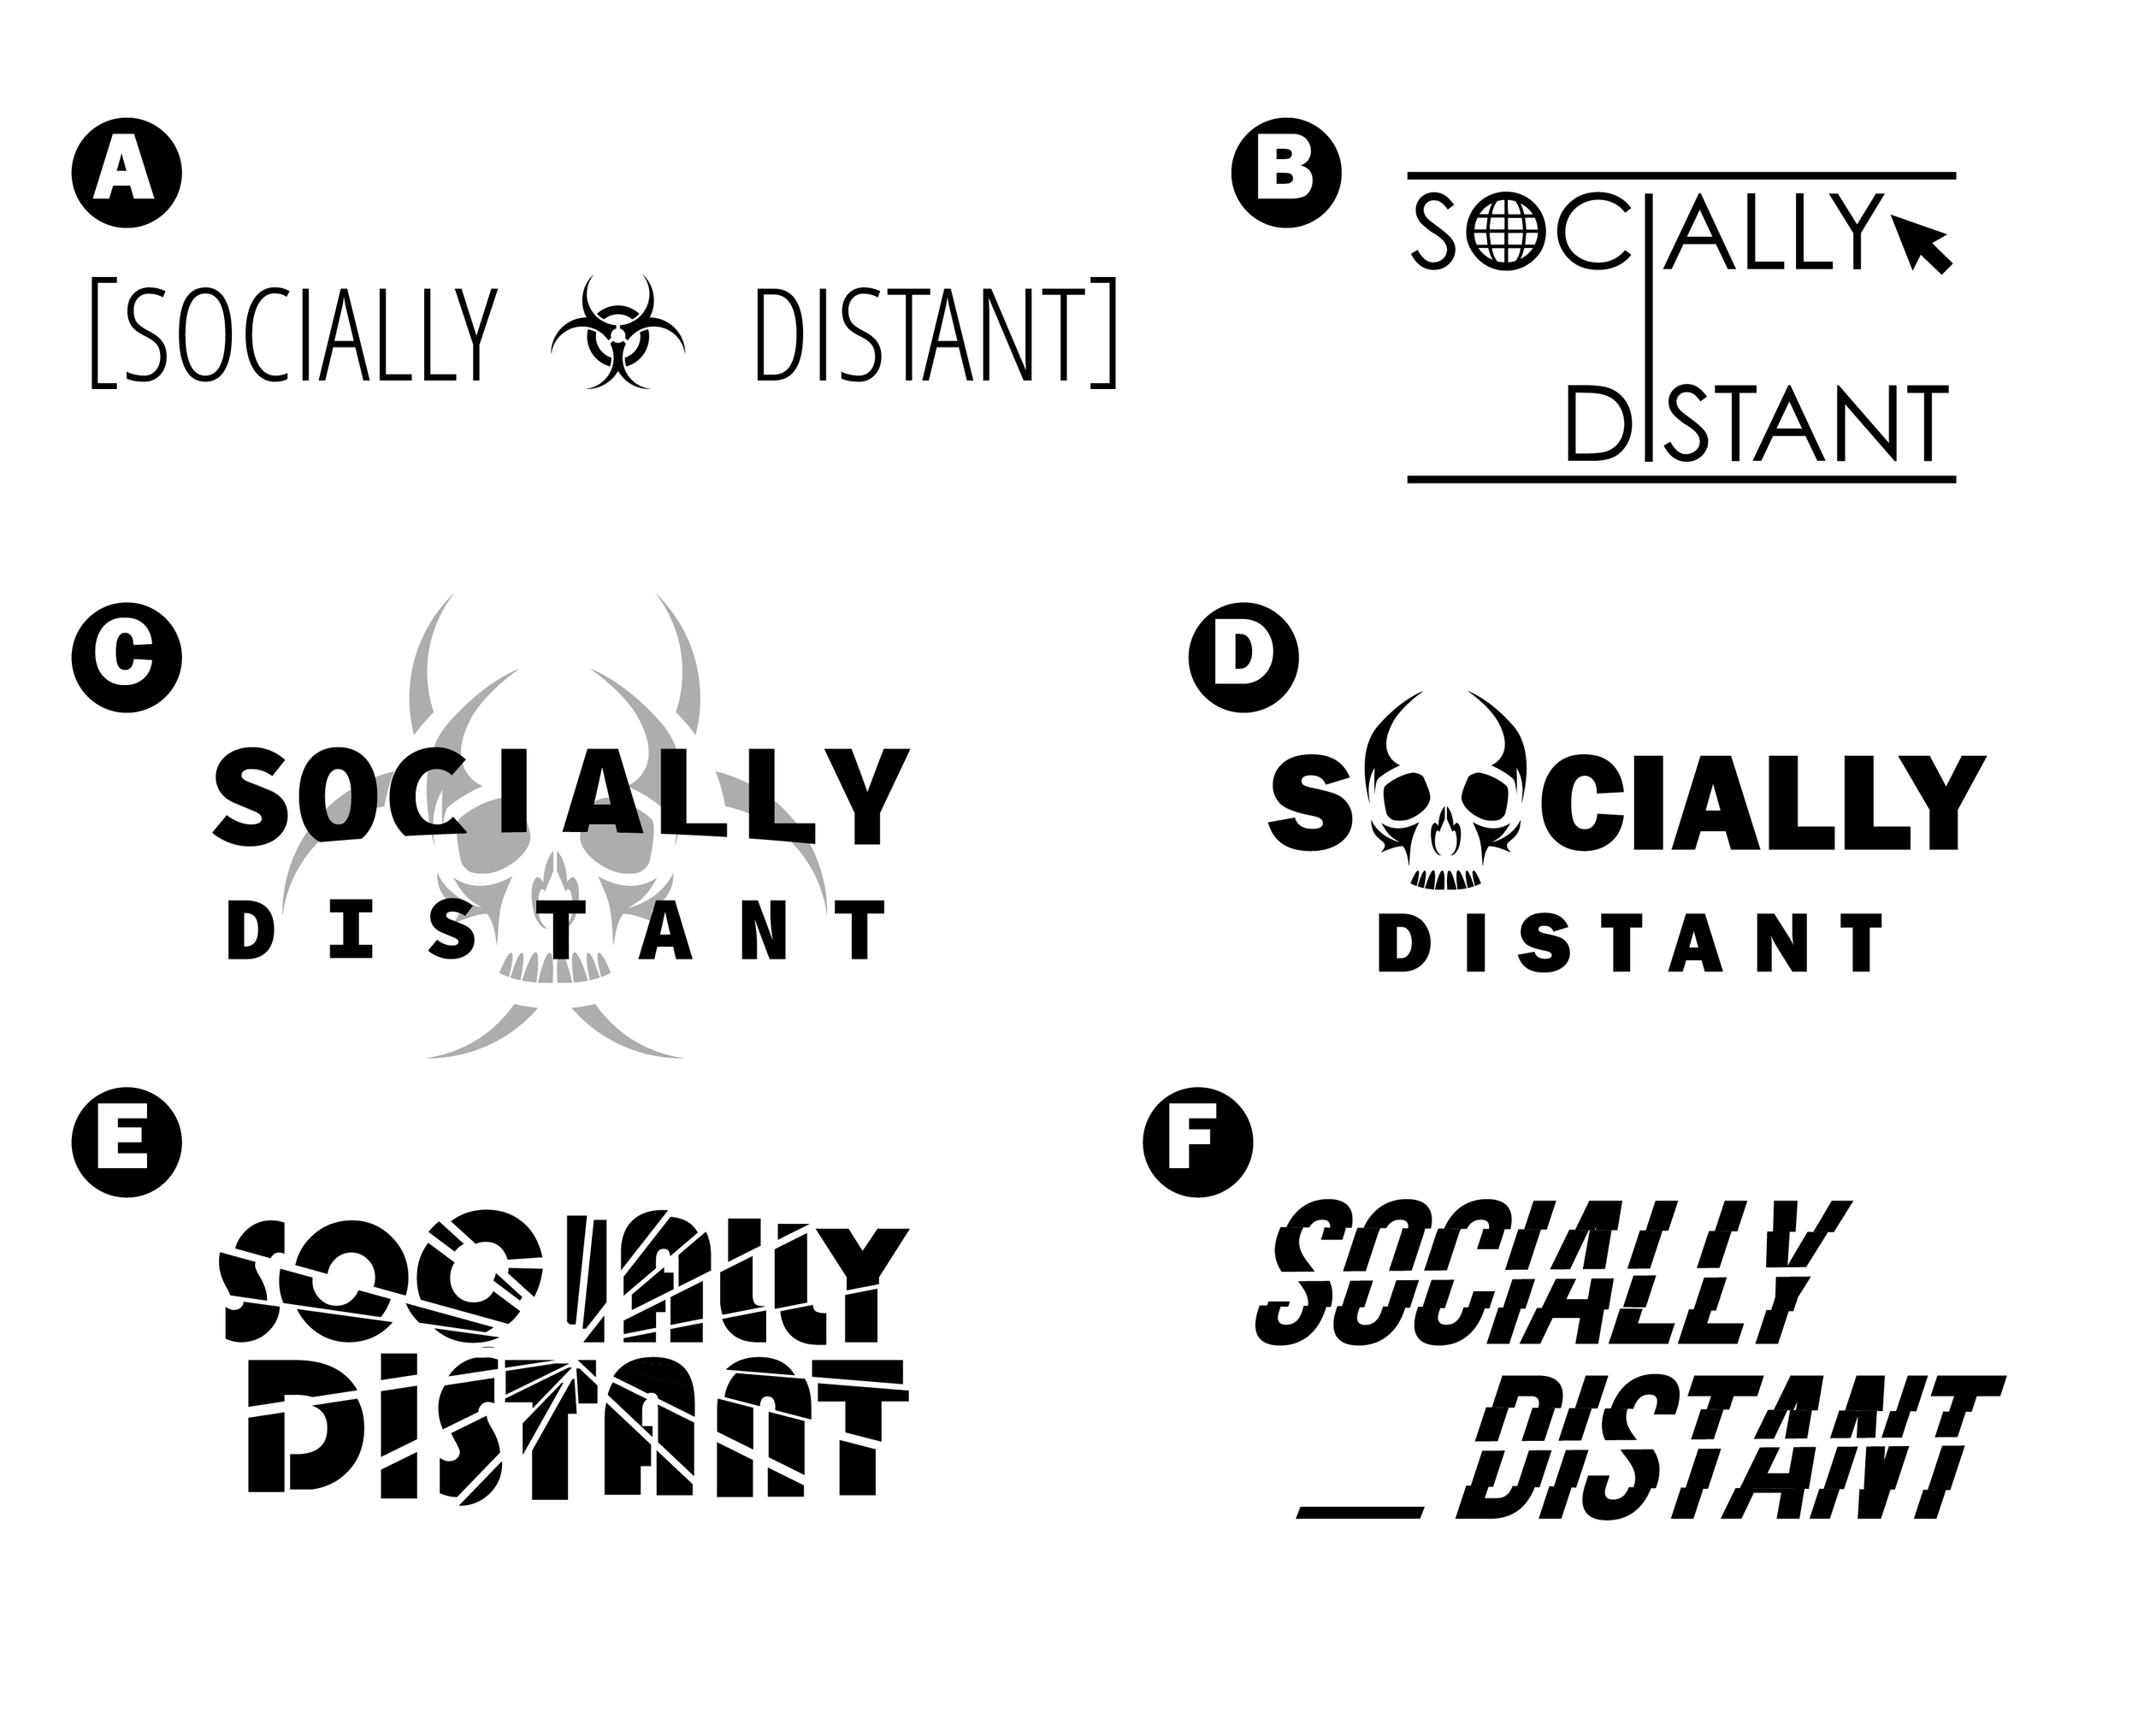 Image showing several work-in-progress Socially Distant logo ideas